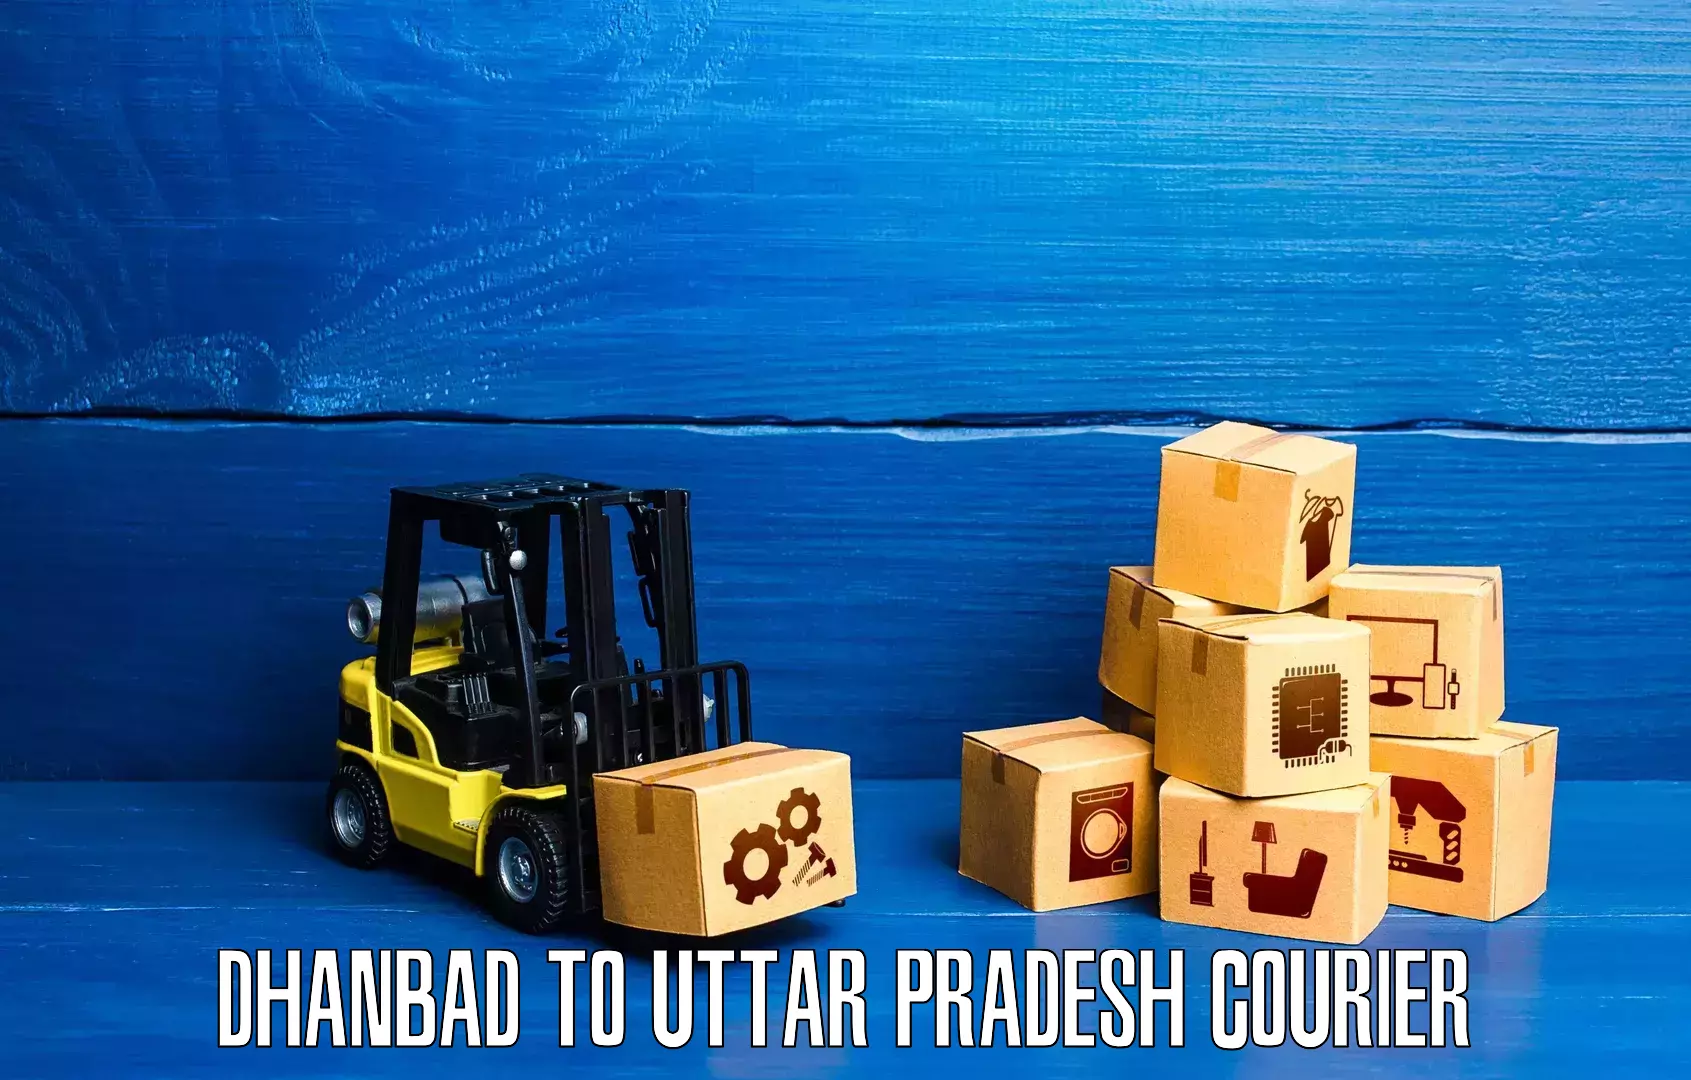 Courier service partnerships Dhanbad to Basti